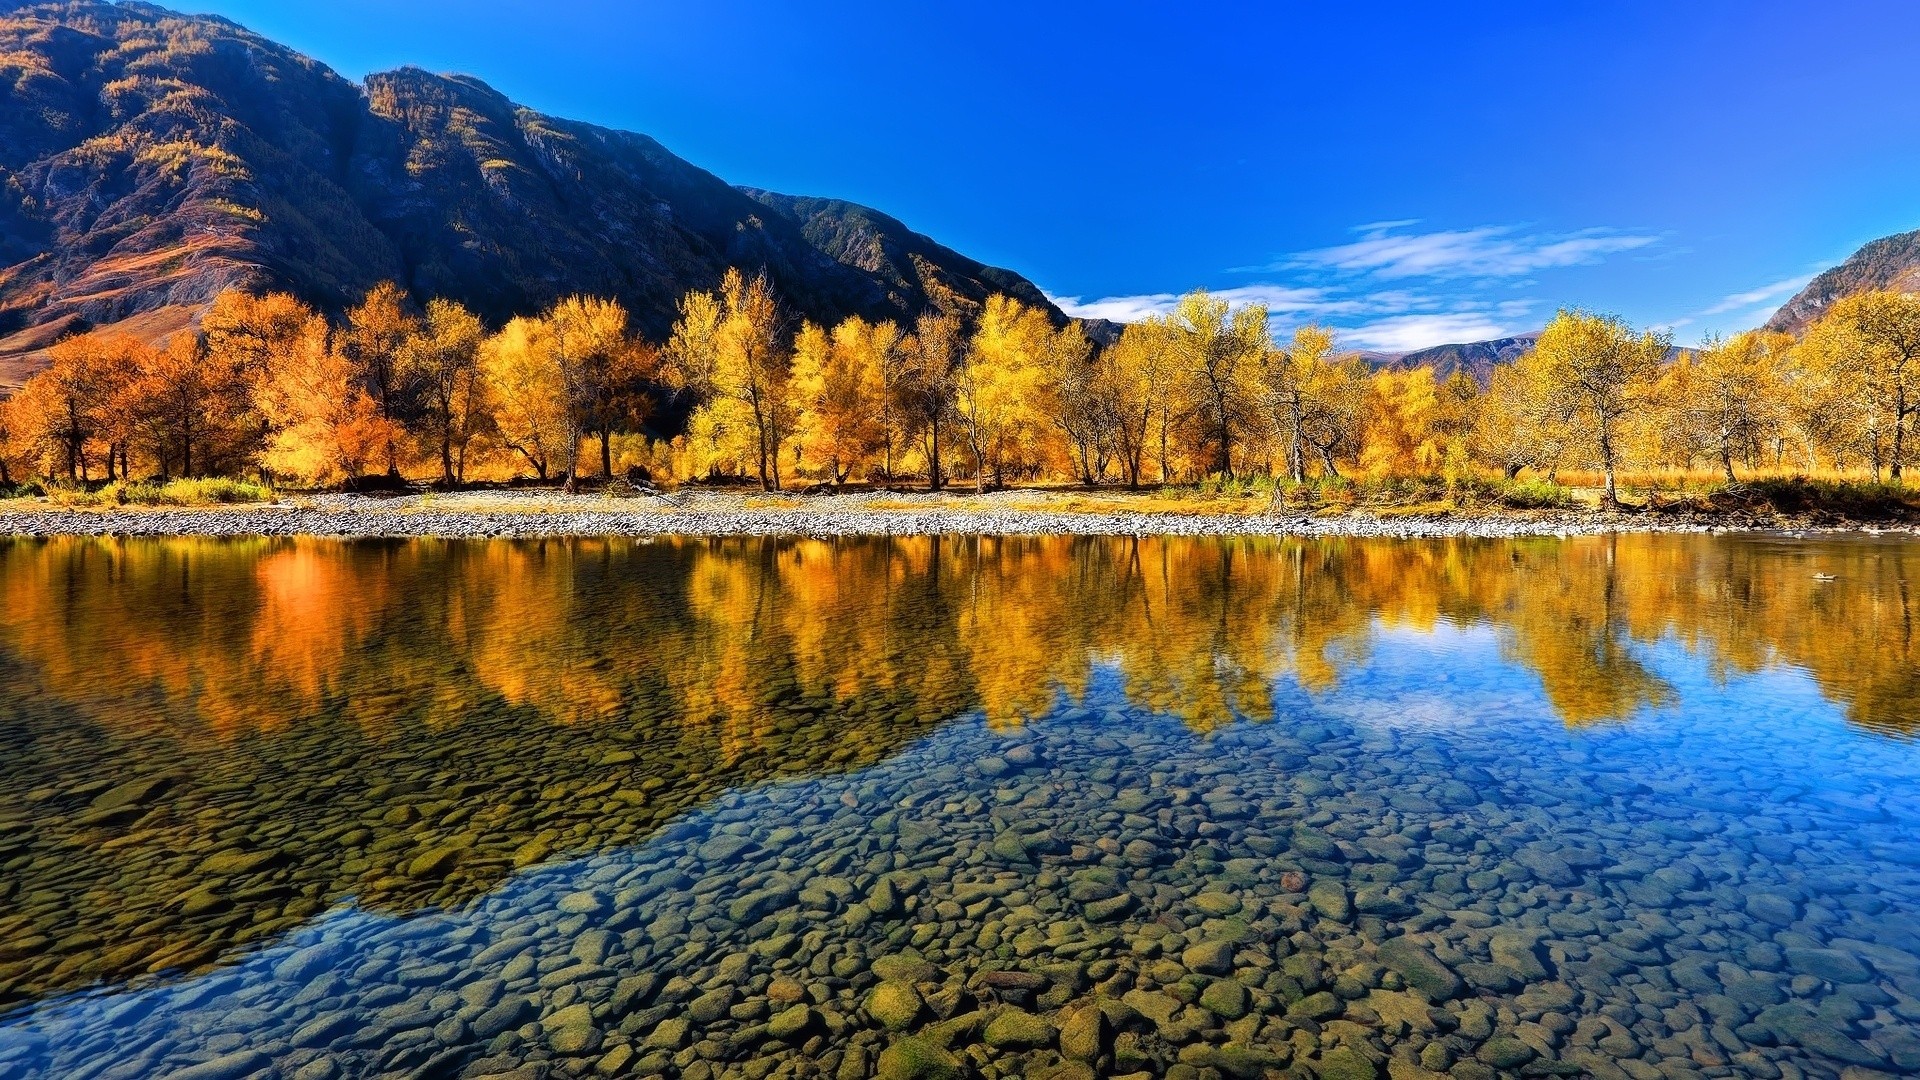 General 1920x1080 landscape fall reflection Altai Mountains mountains nature Mongolia